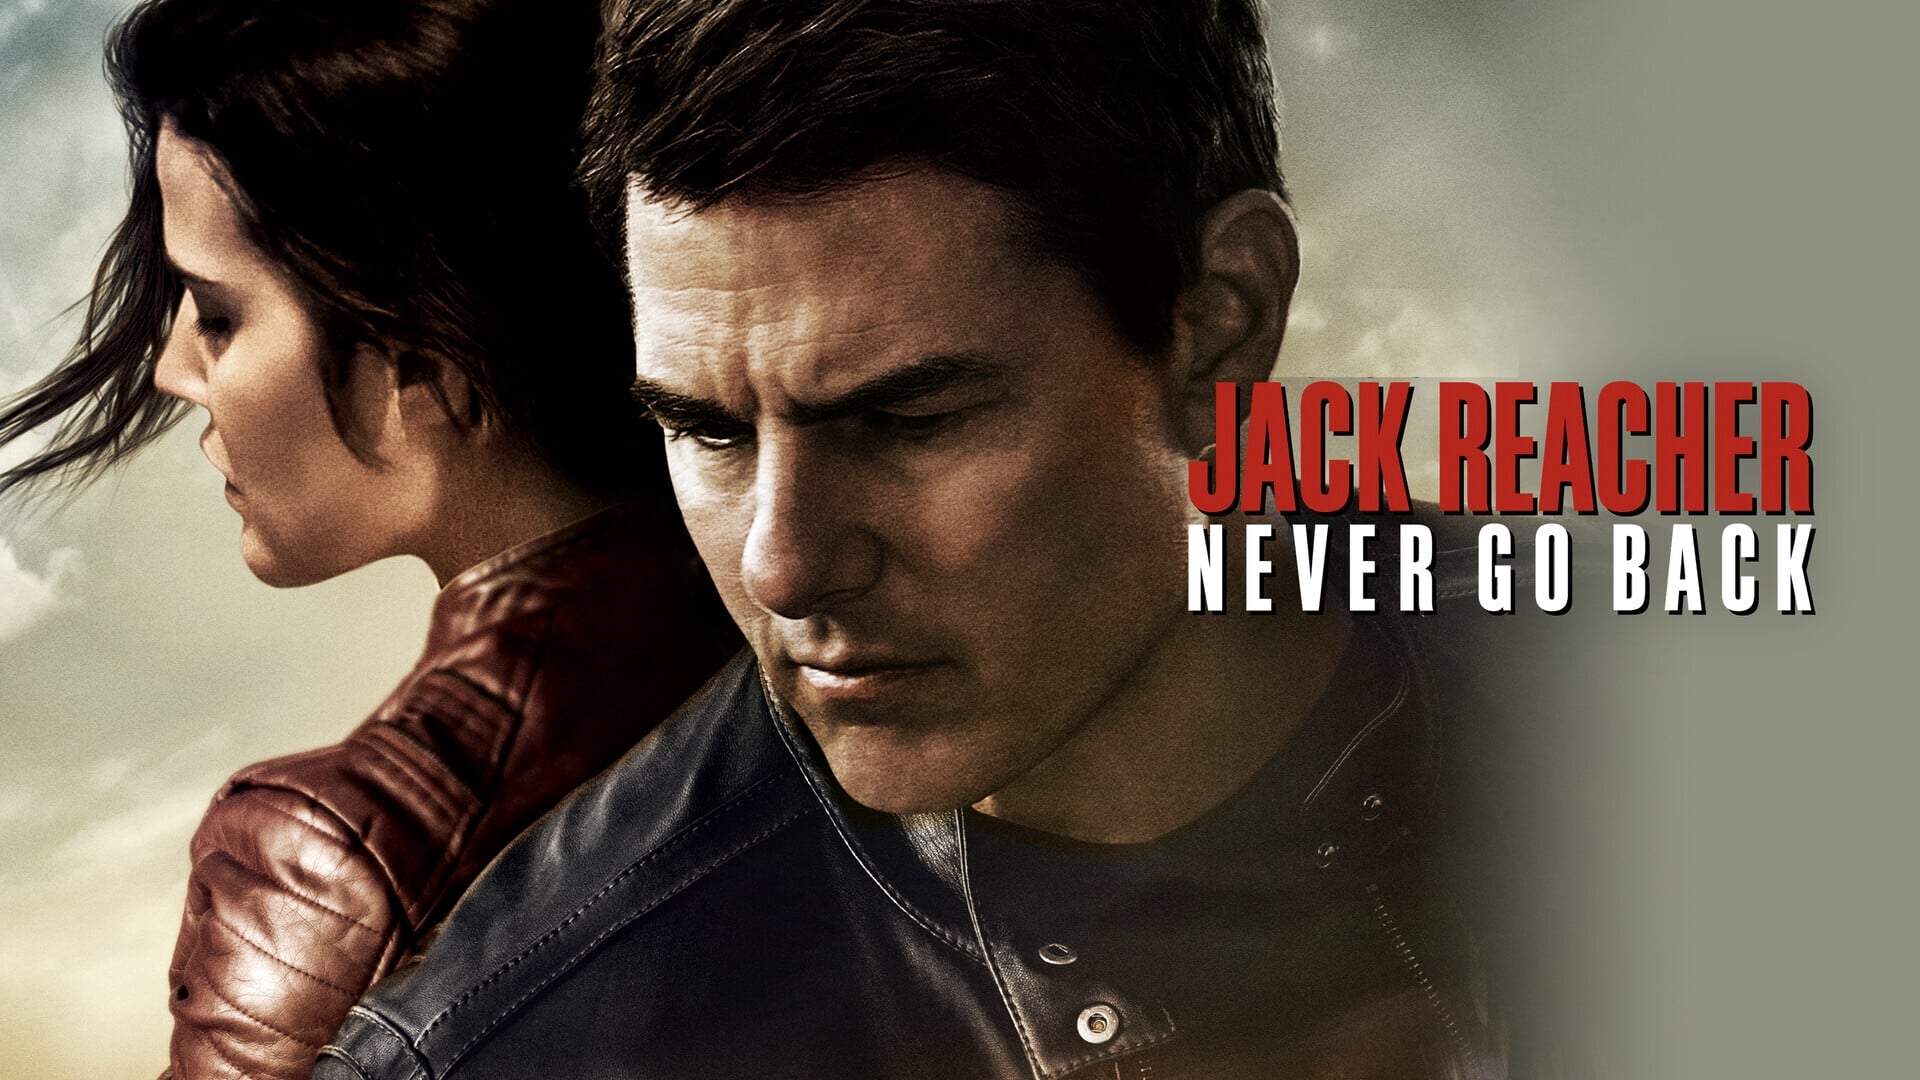 Now Playing: Jack Reacher: Never Go BackPaused. 